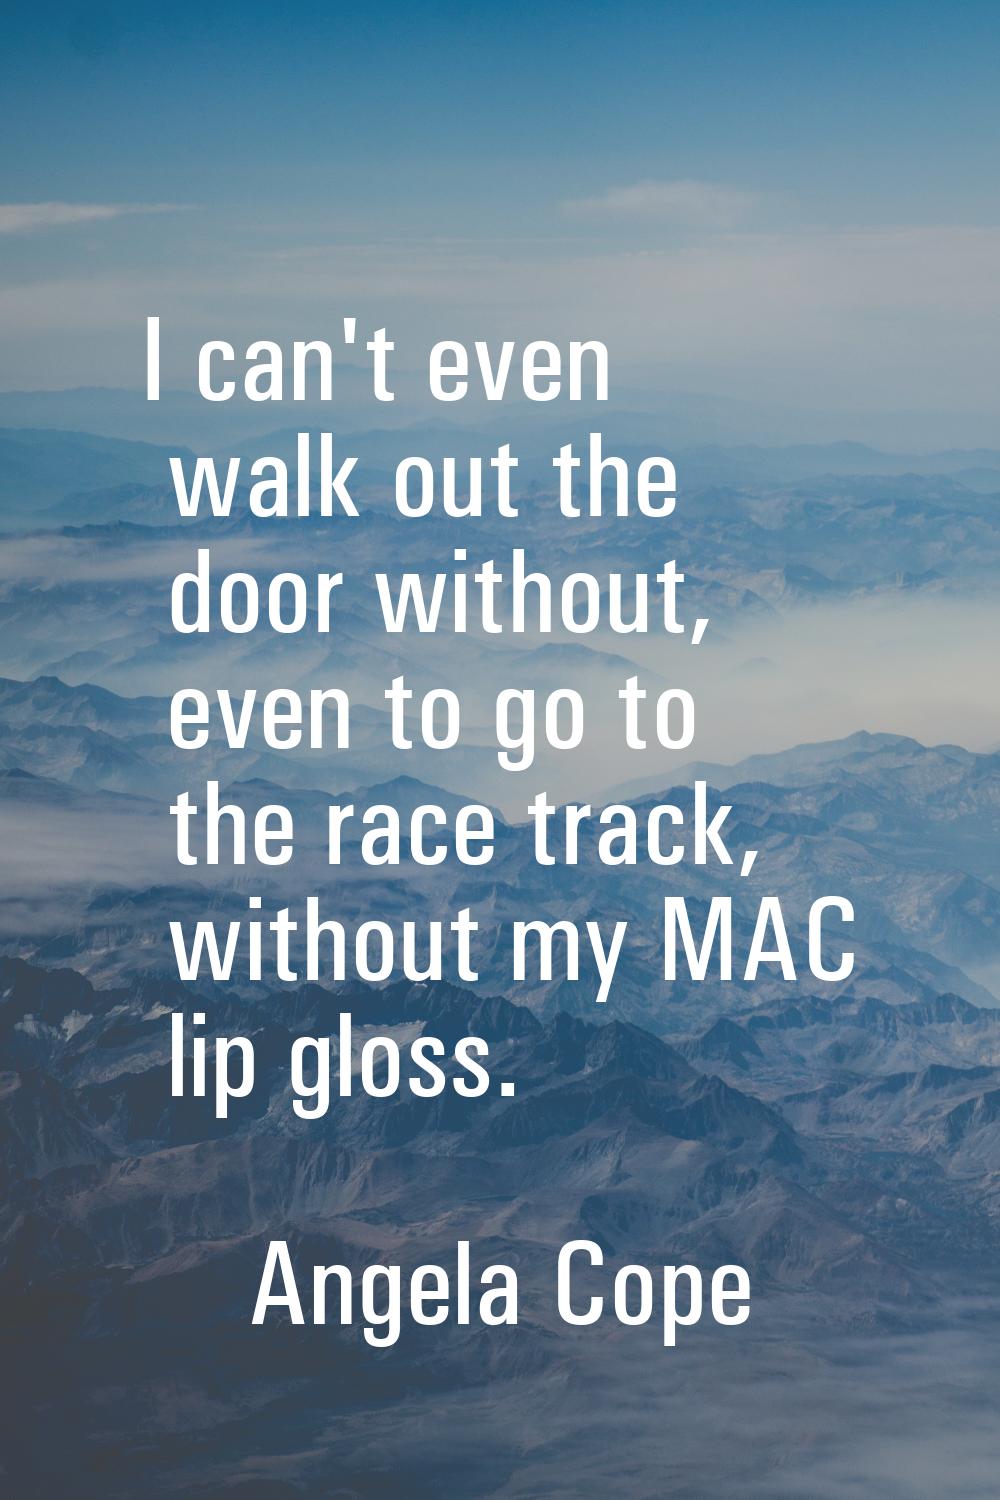 I can't even walk out the door without, even to go to the race track, without my MAC lip gloss.